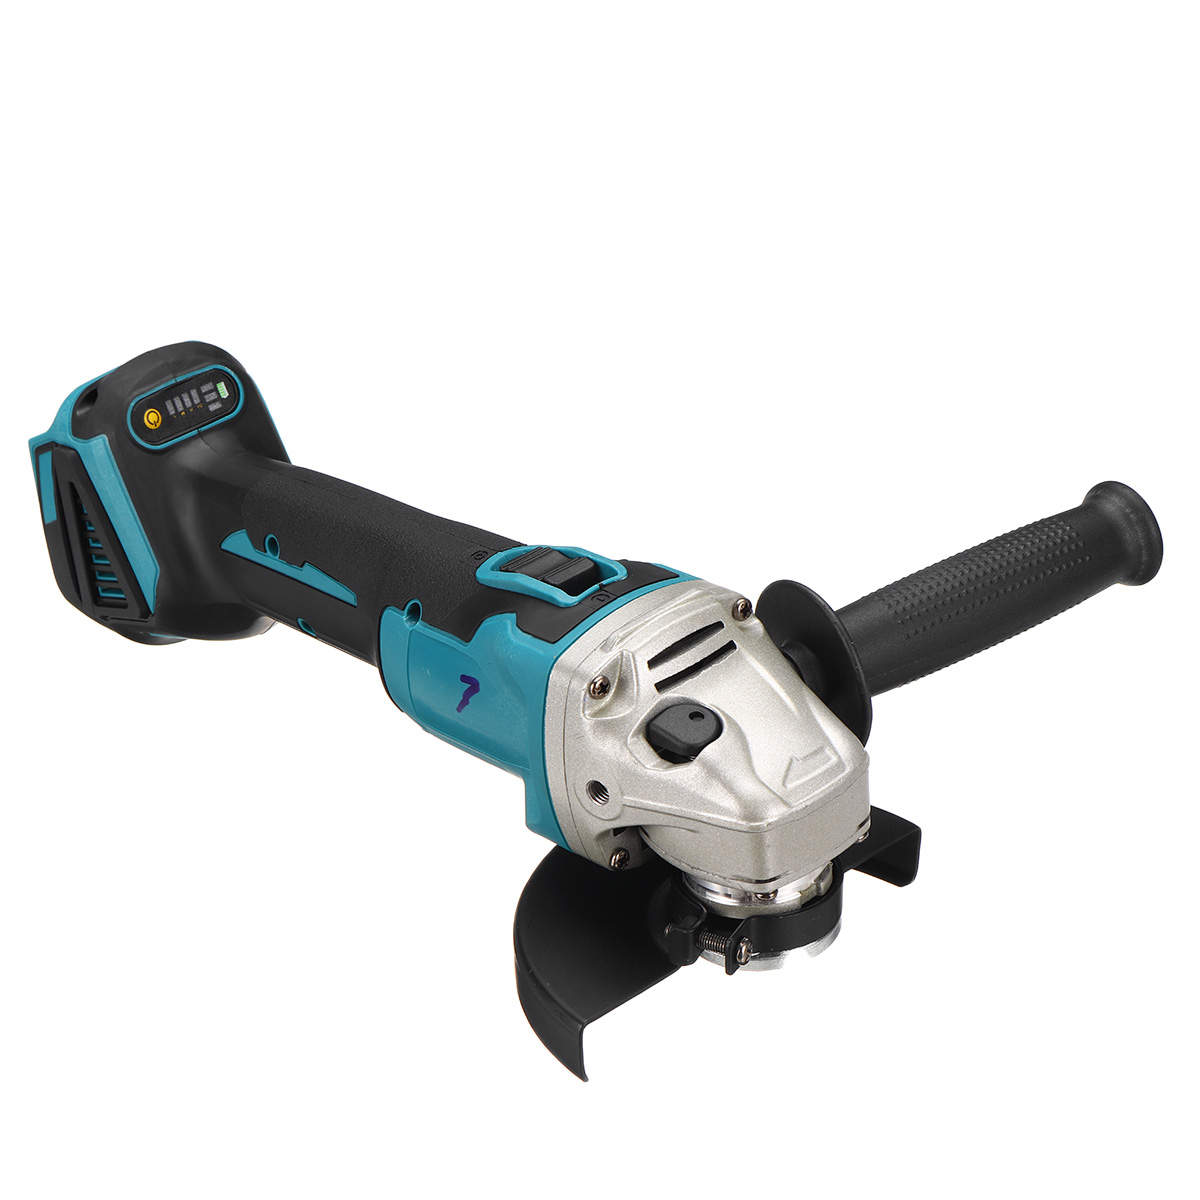 Drillpro-125mm-4-Speed-Regulated-Angle-Grinder-Rechargable-Li-ion-Battery-Brushless-Electric-Grinder-1699793-7